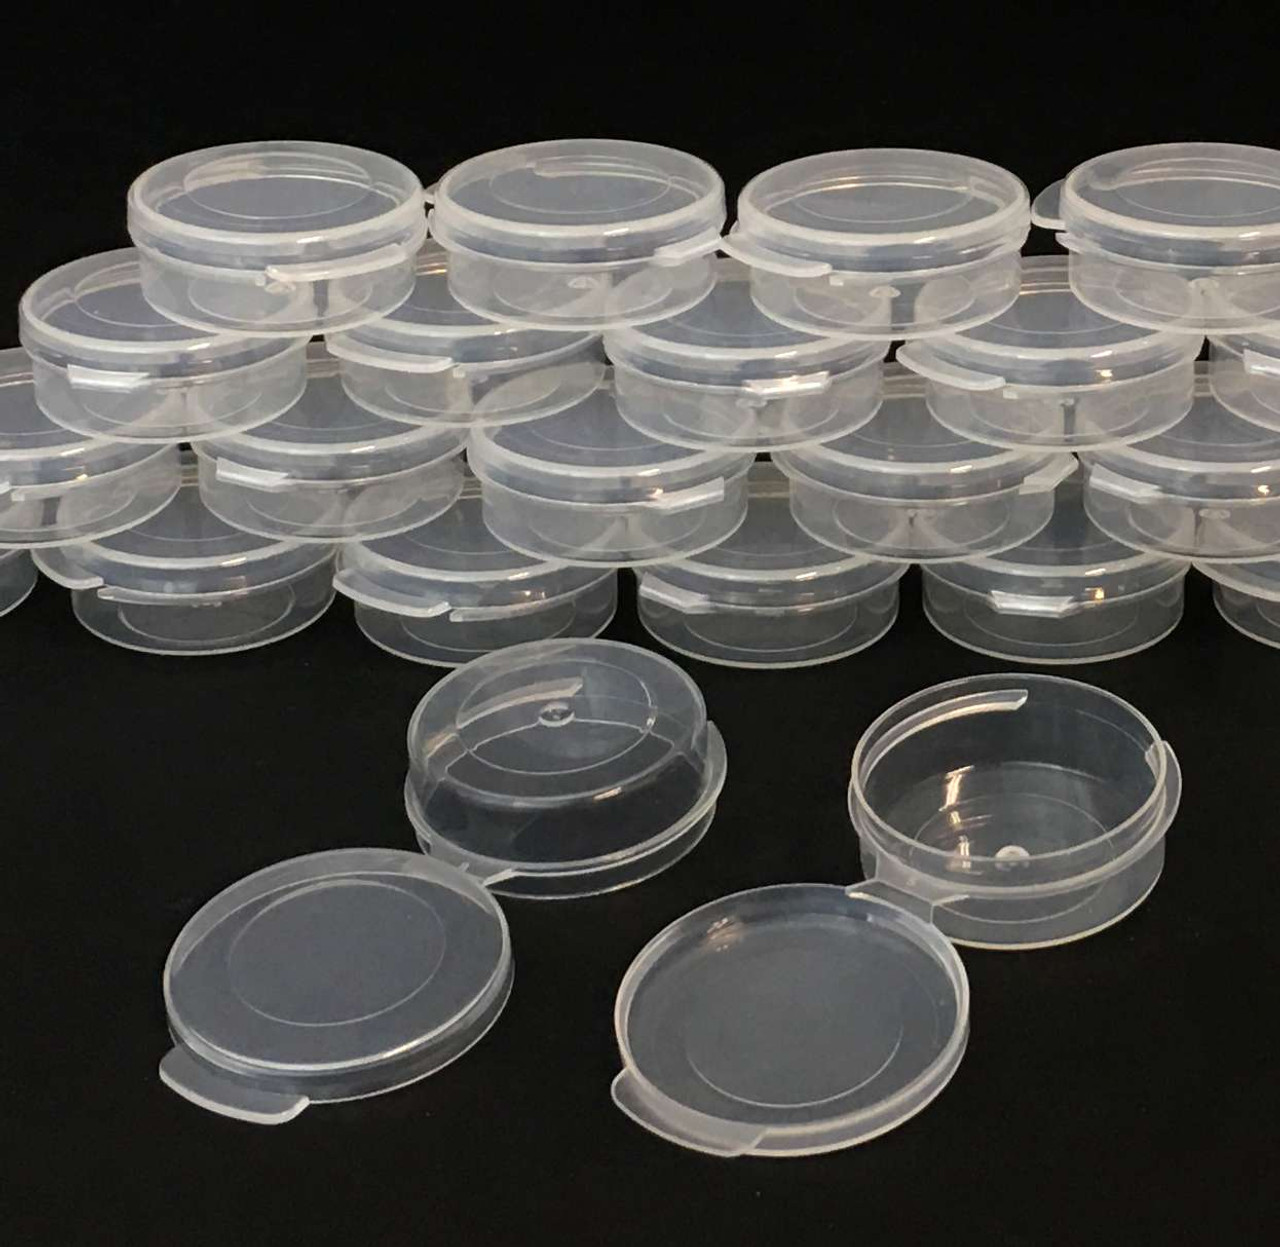 https://cdn11.bigcommerce.com/s-qd7k5gxi/images/stencil/1280x1280/products/503/7251/Cosmetic-Flip-Top-Hinged-Lid-Jars-Beauty-Containers-10-Ml-Clear-5094-Beauty-Makeup-Supply_5103__36269.1661391097.jpg?c=2?imbypass=on